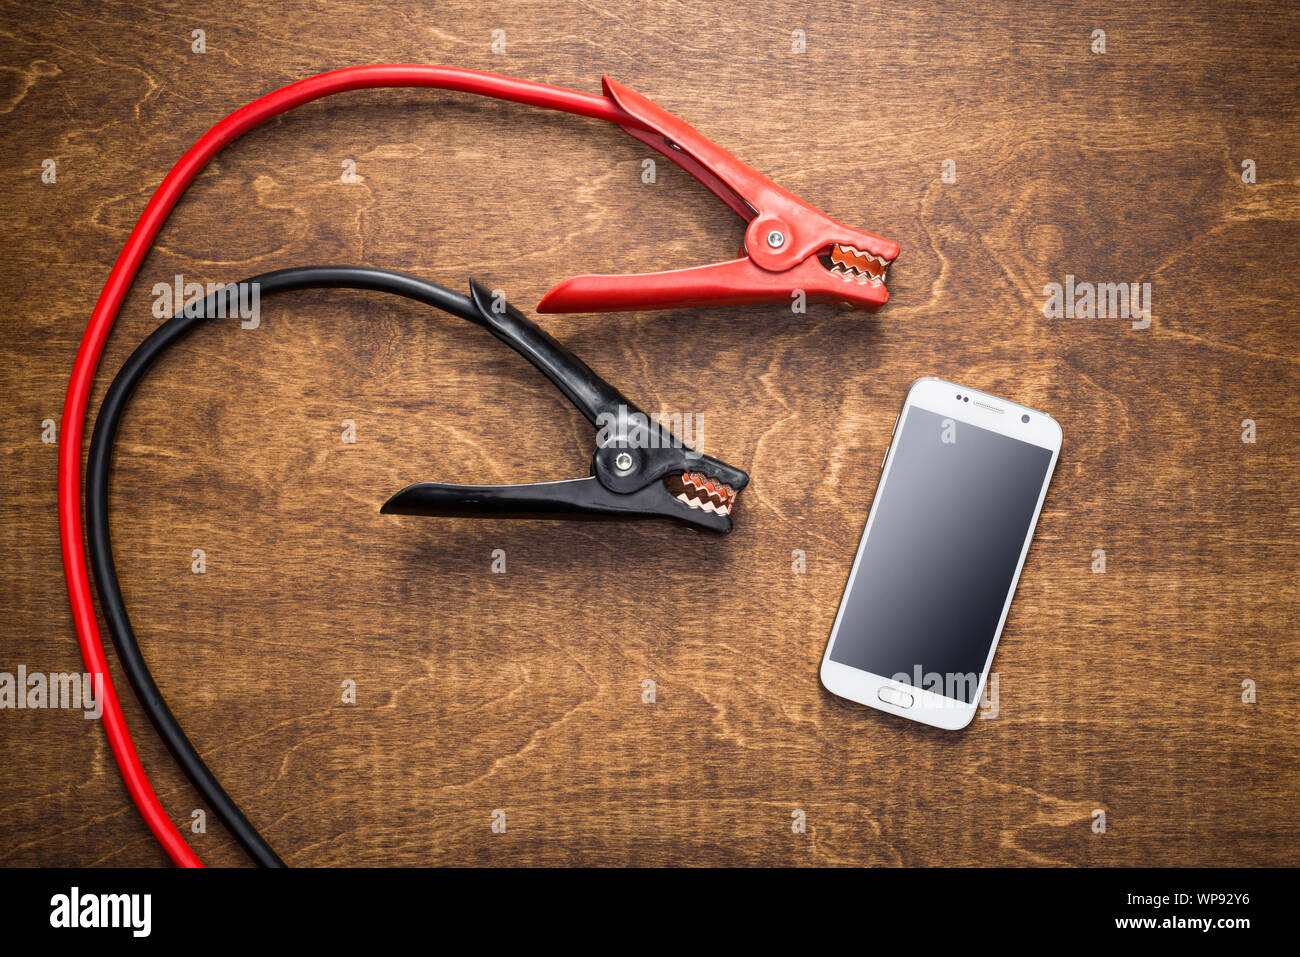 Charching clamps near smartphone with dead battery. Phone charging, energy efficiency concept. Stock Photo